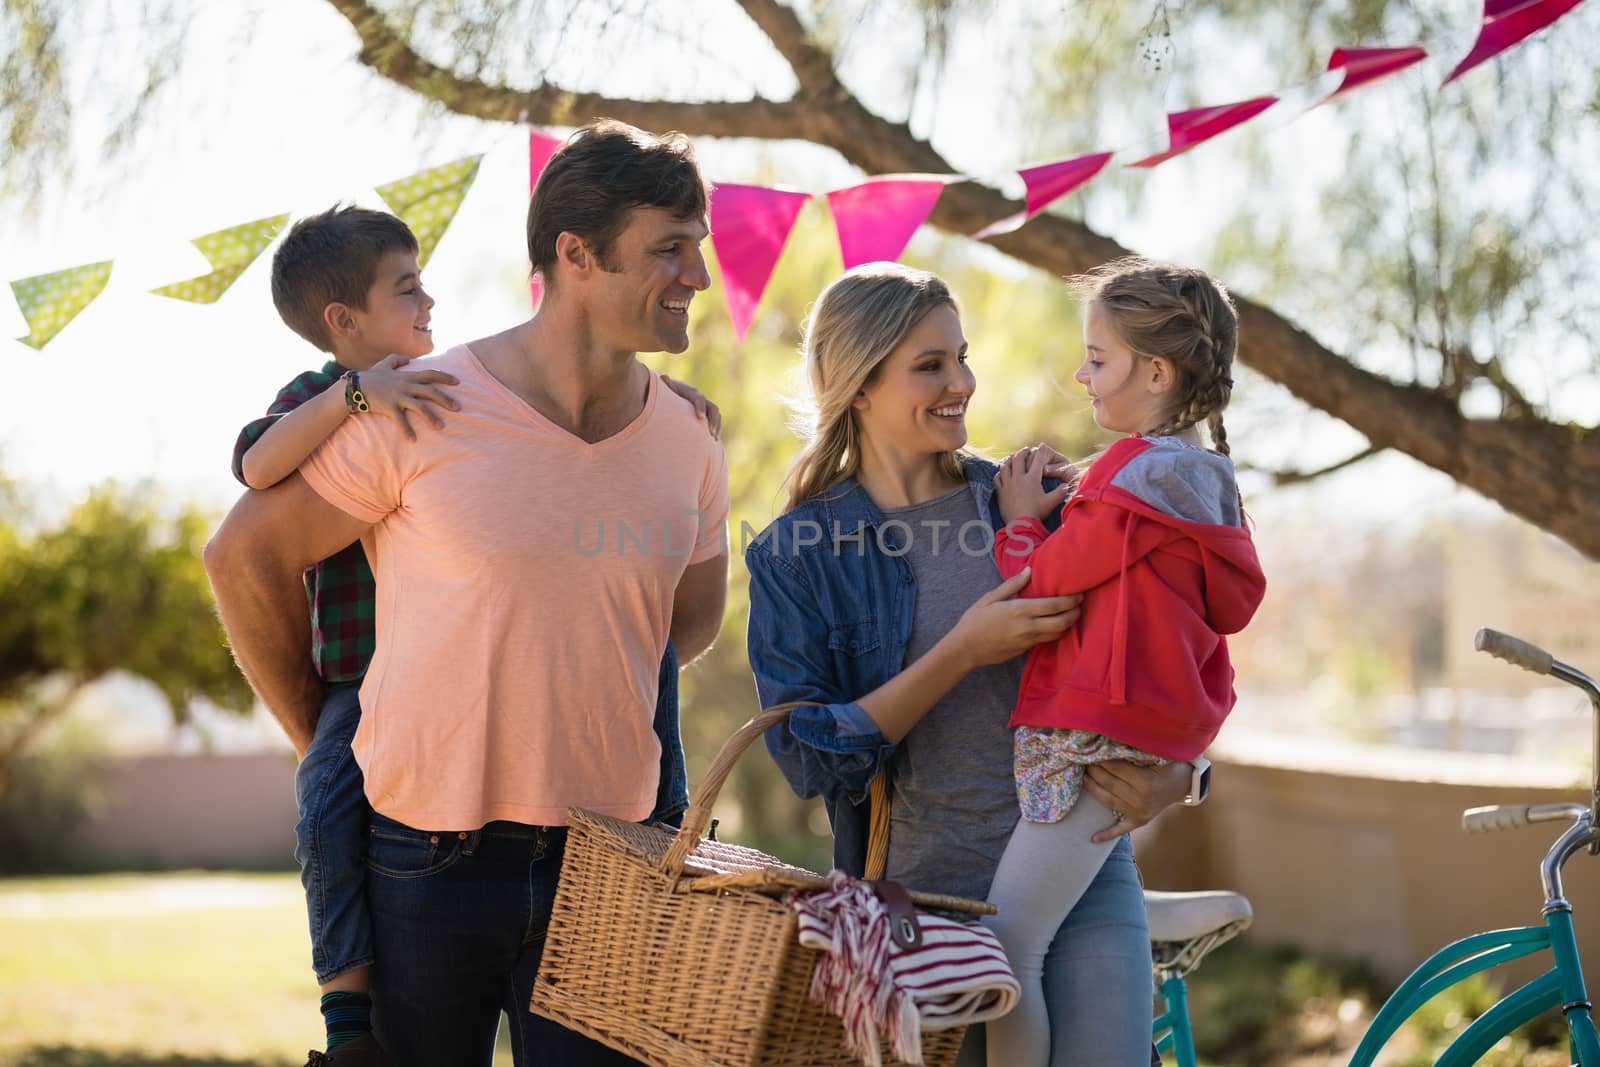 Happy family enjoying together in the park on a sunny day